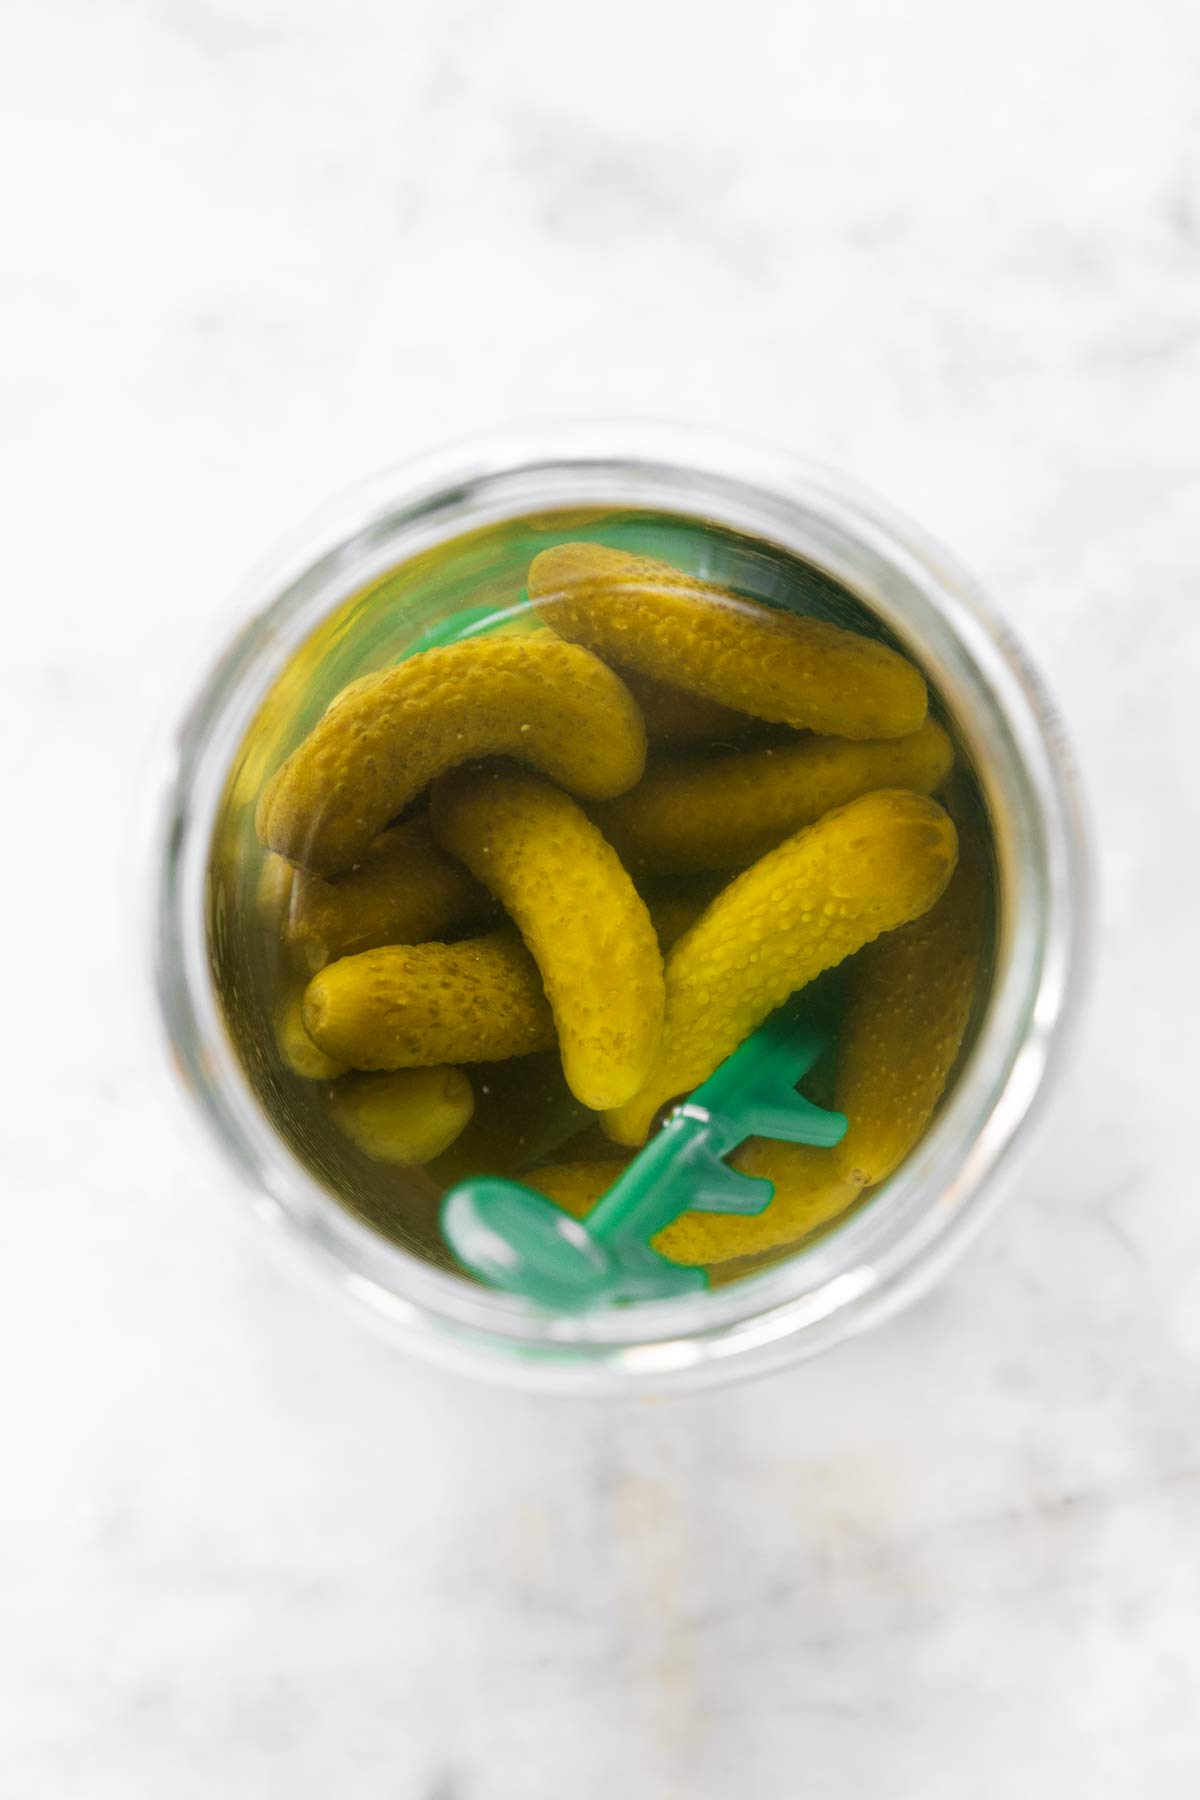 overhead view of opened glass of Cornichon pickles